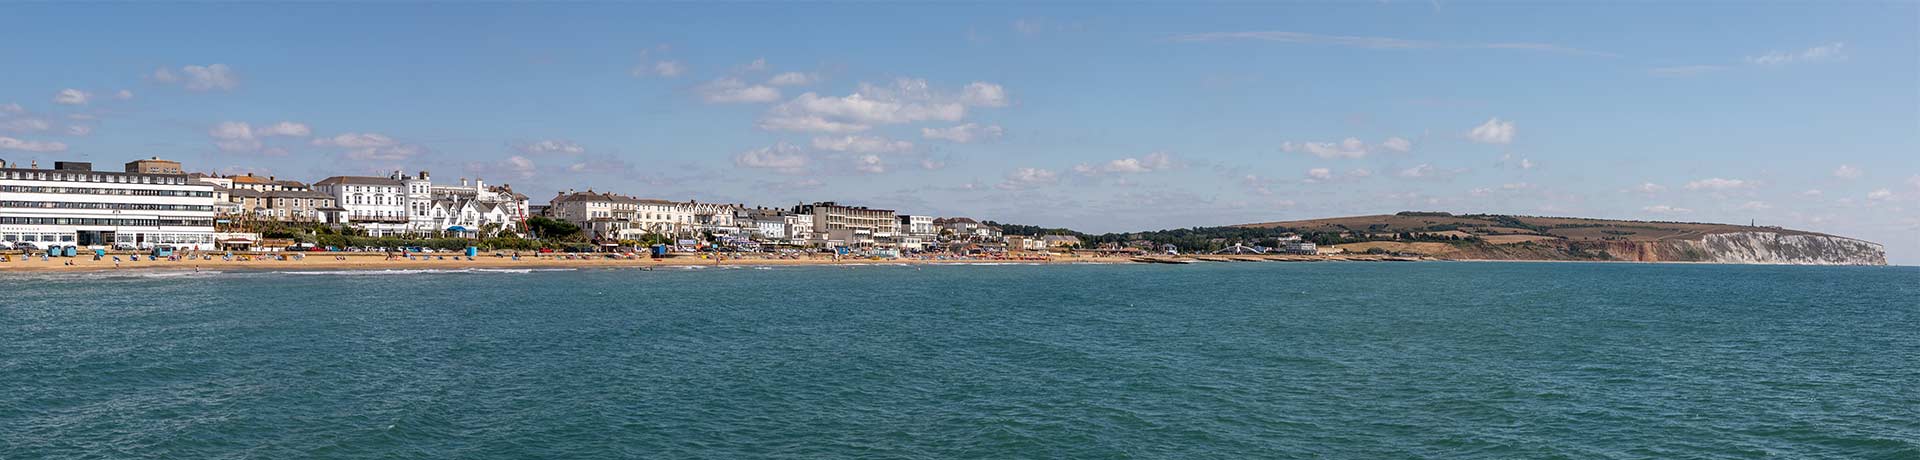 Best beaches on the Isle of Wight